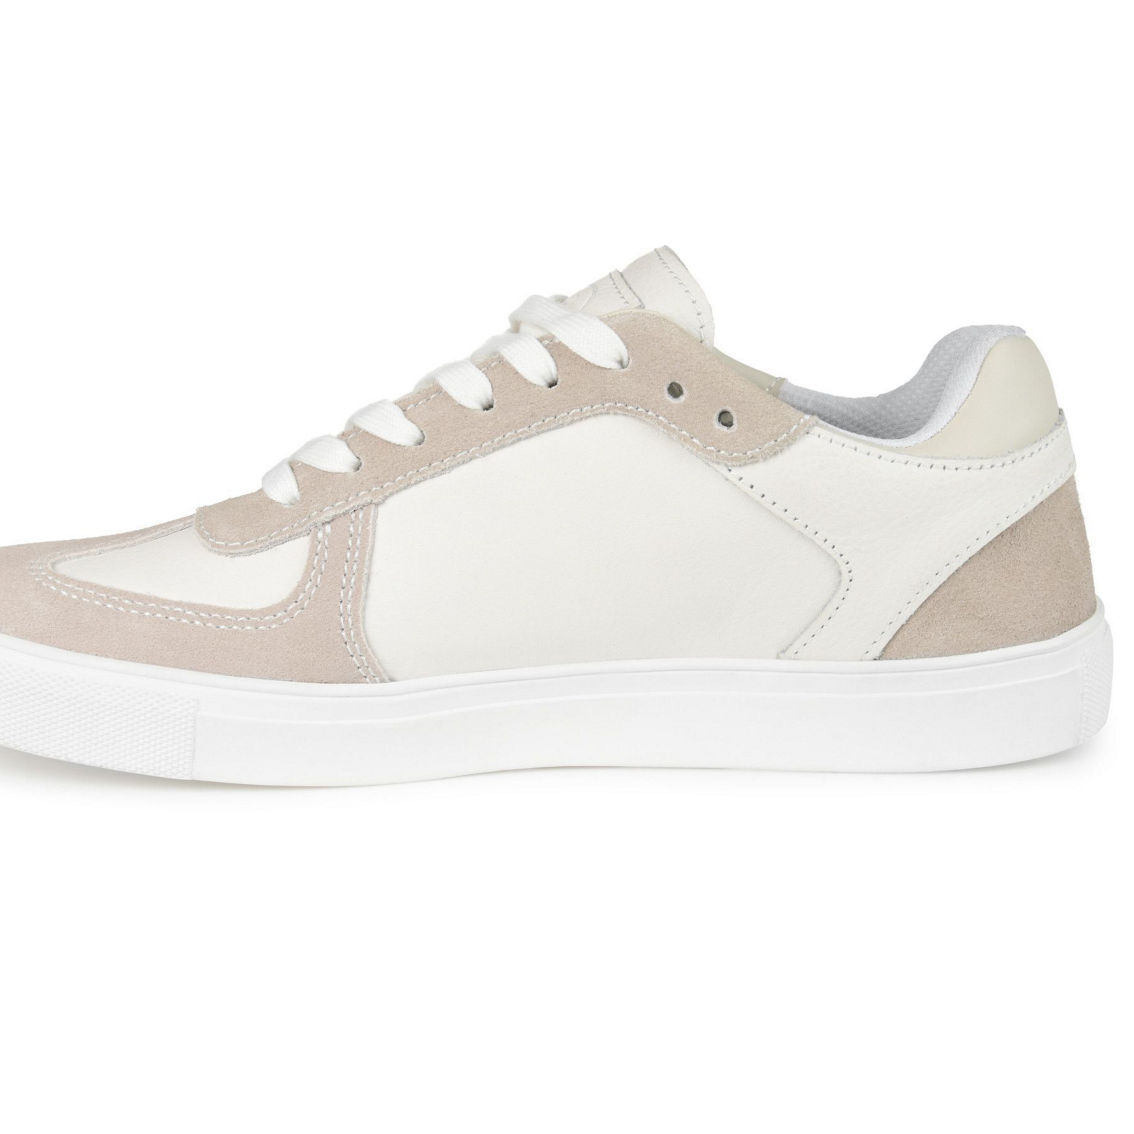 Thomas & Vine Gambit Casual Leather Sneaker - Image 4 of 4